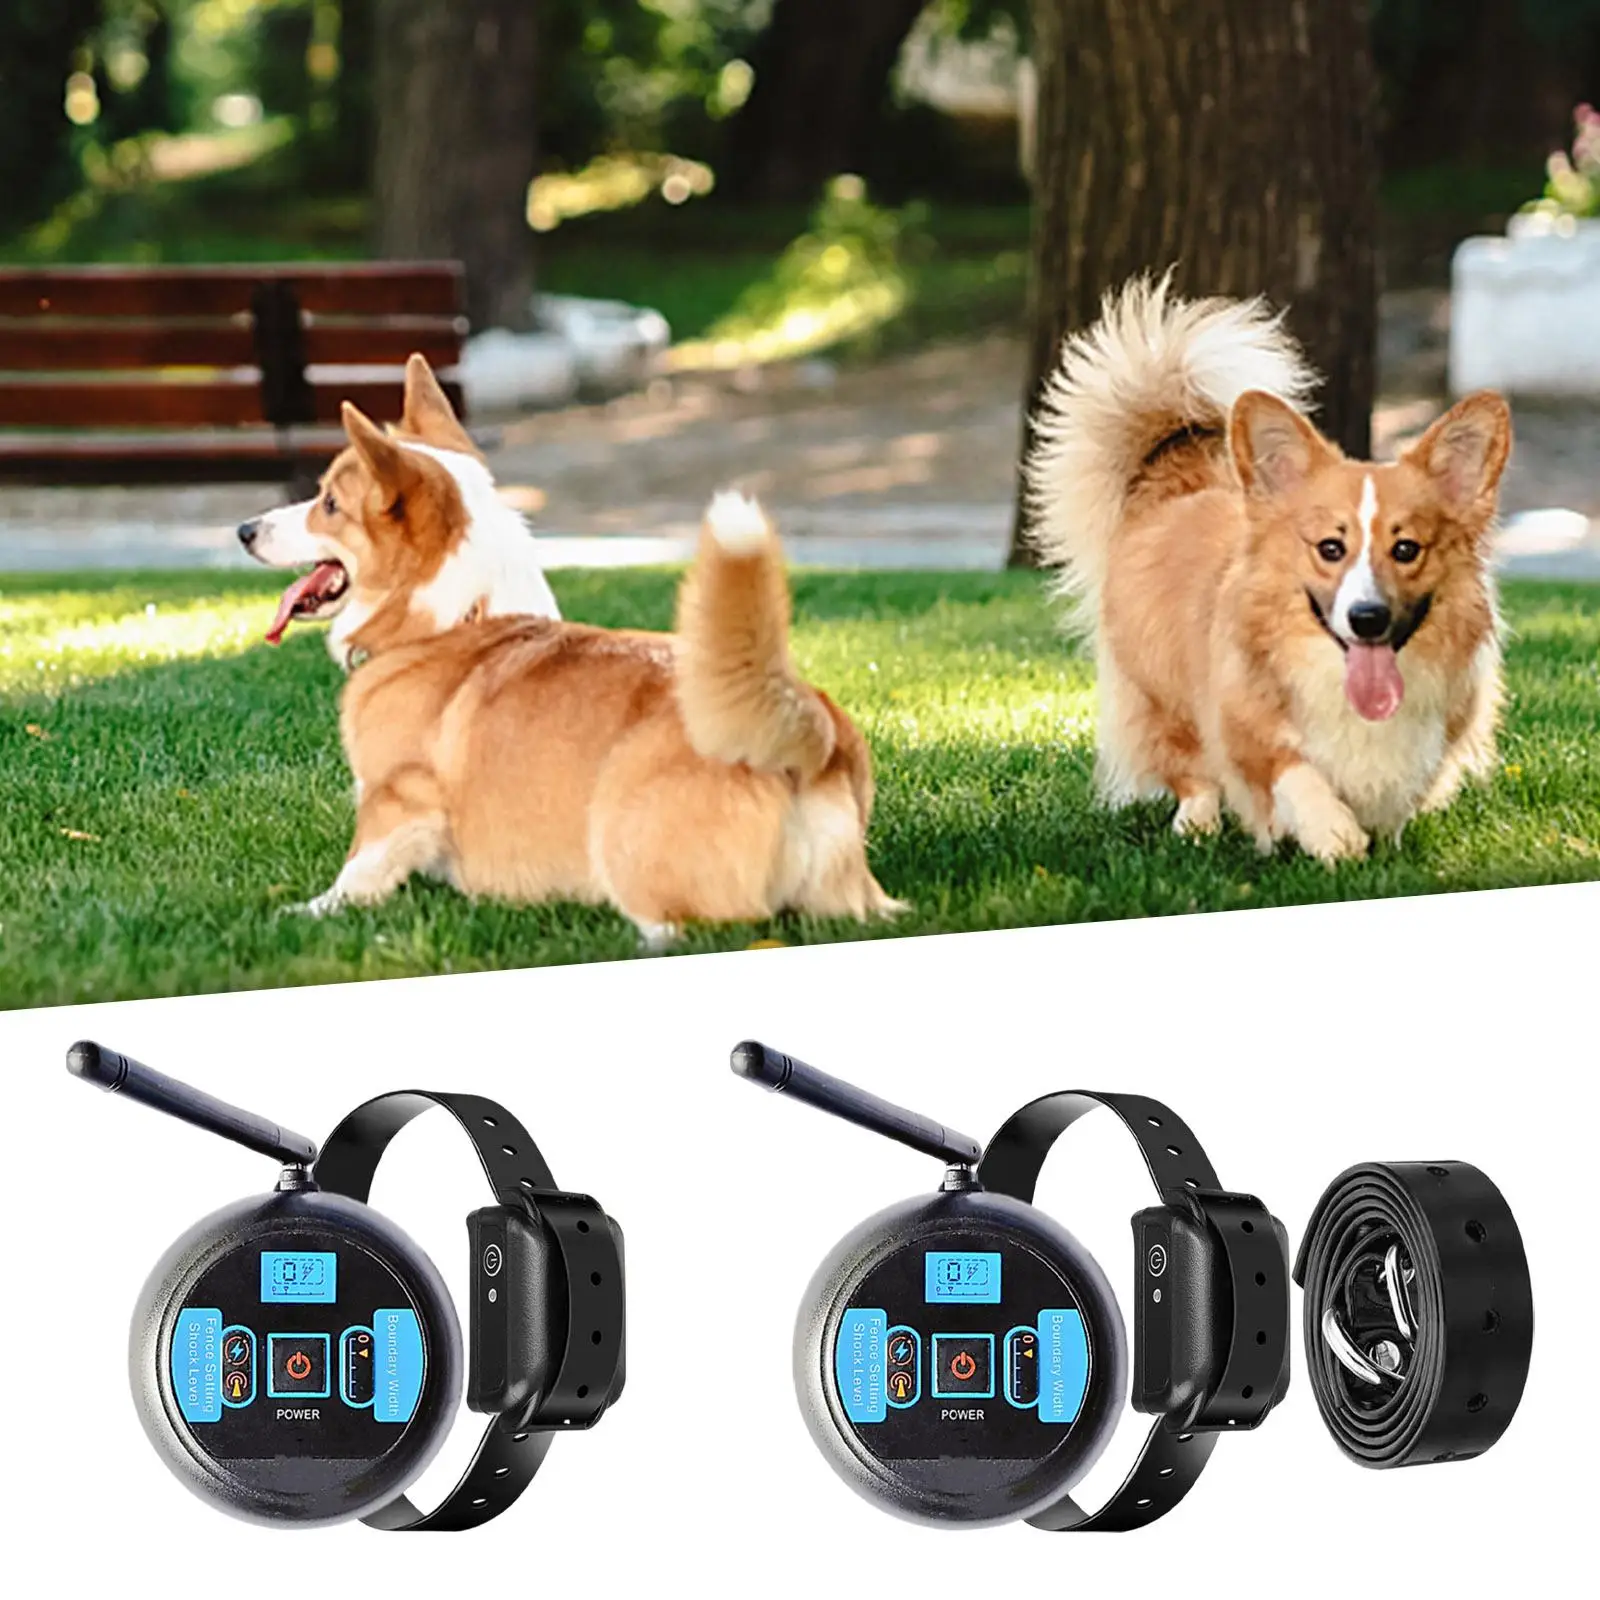 Dog Training Collar Behavior Correct with Remote 656ft Electric Dogs Fence